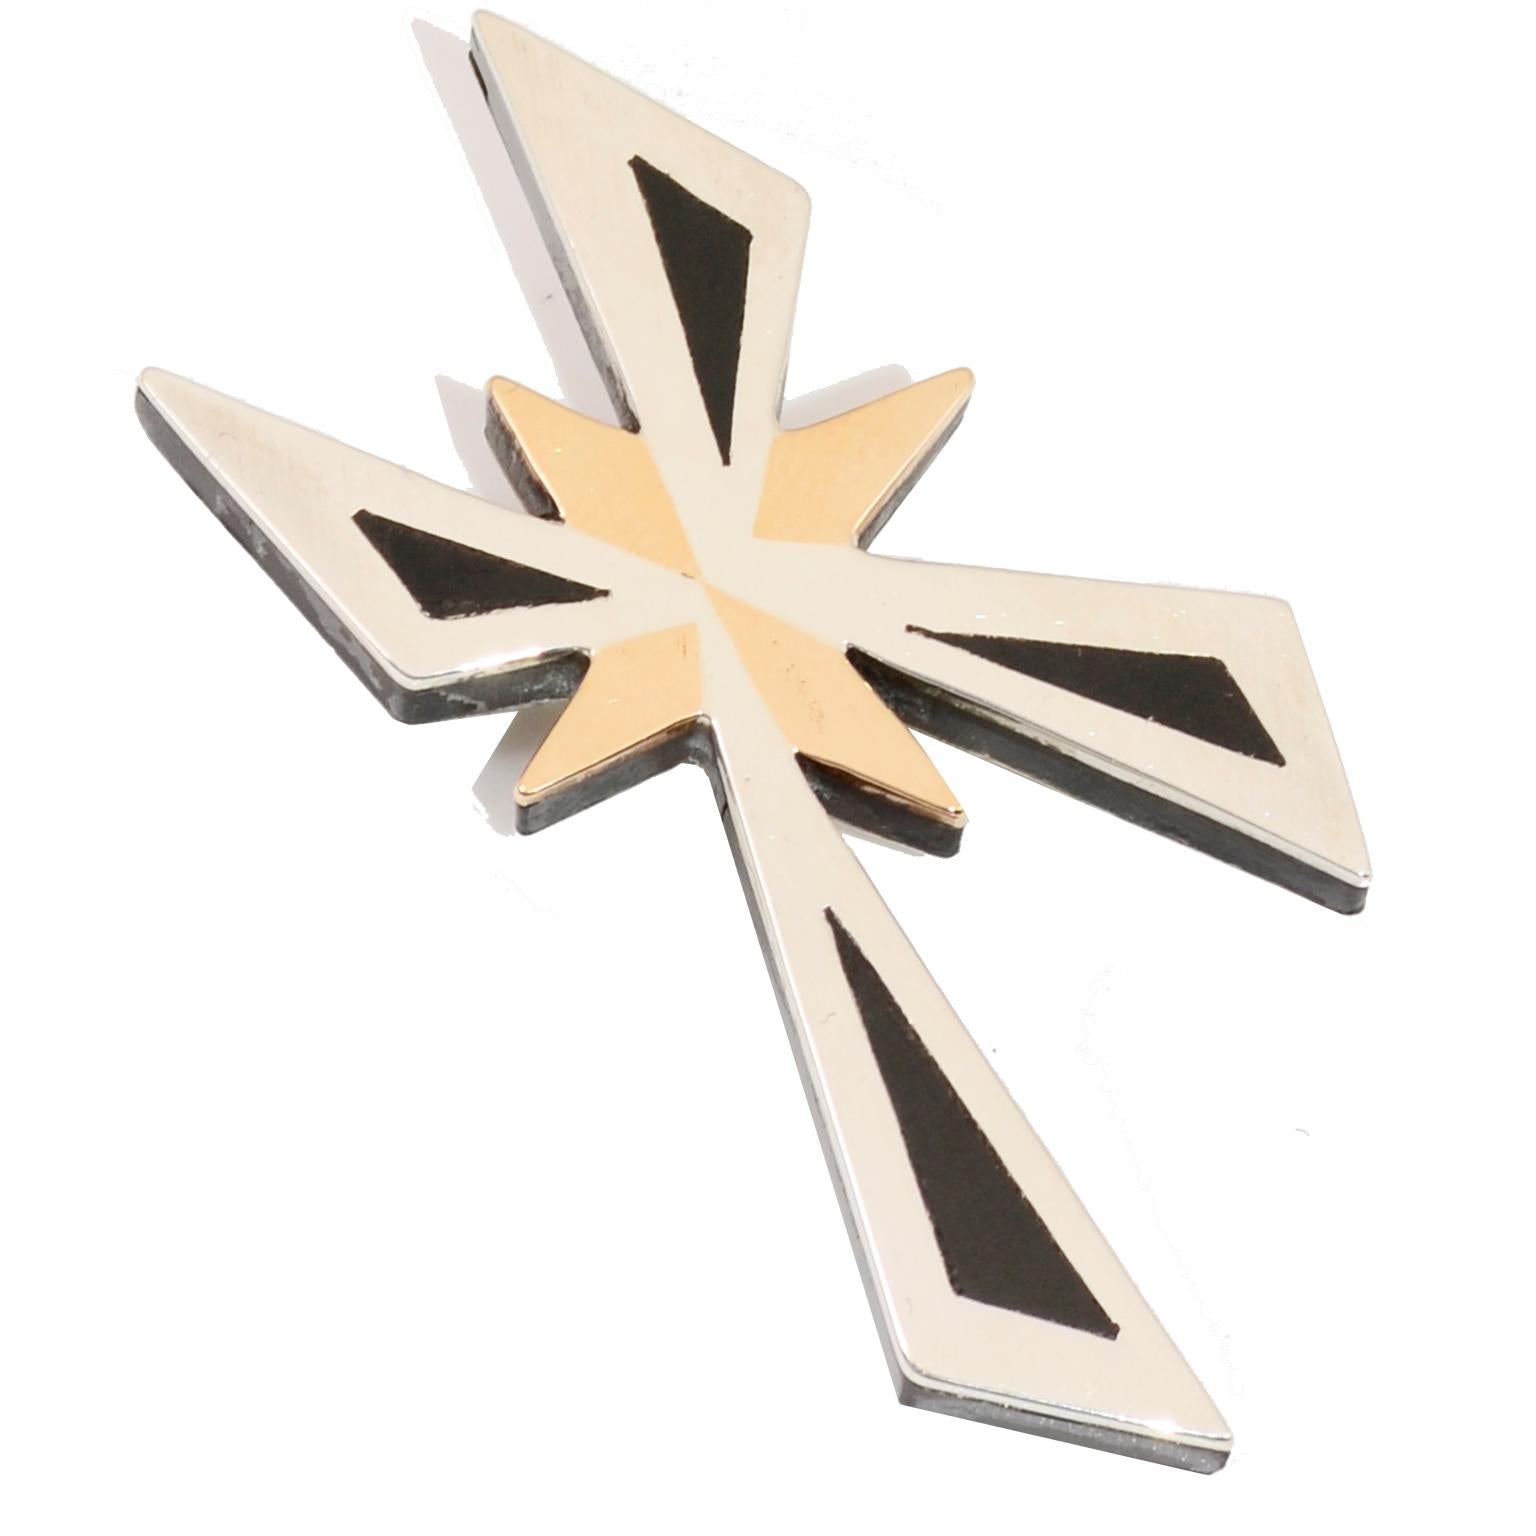 This is a lovely mixed metal sterling silver modernist mid century vintage cross pendant that can also be worn as a brooch. The piece is marked Hecho en Mexico CRA Signed TONO T-20 Sterling 925 Taxco 
Piedra Negra. A light scratch in the brass star